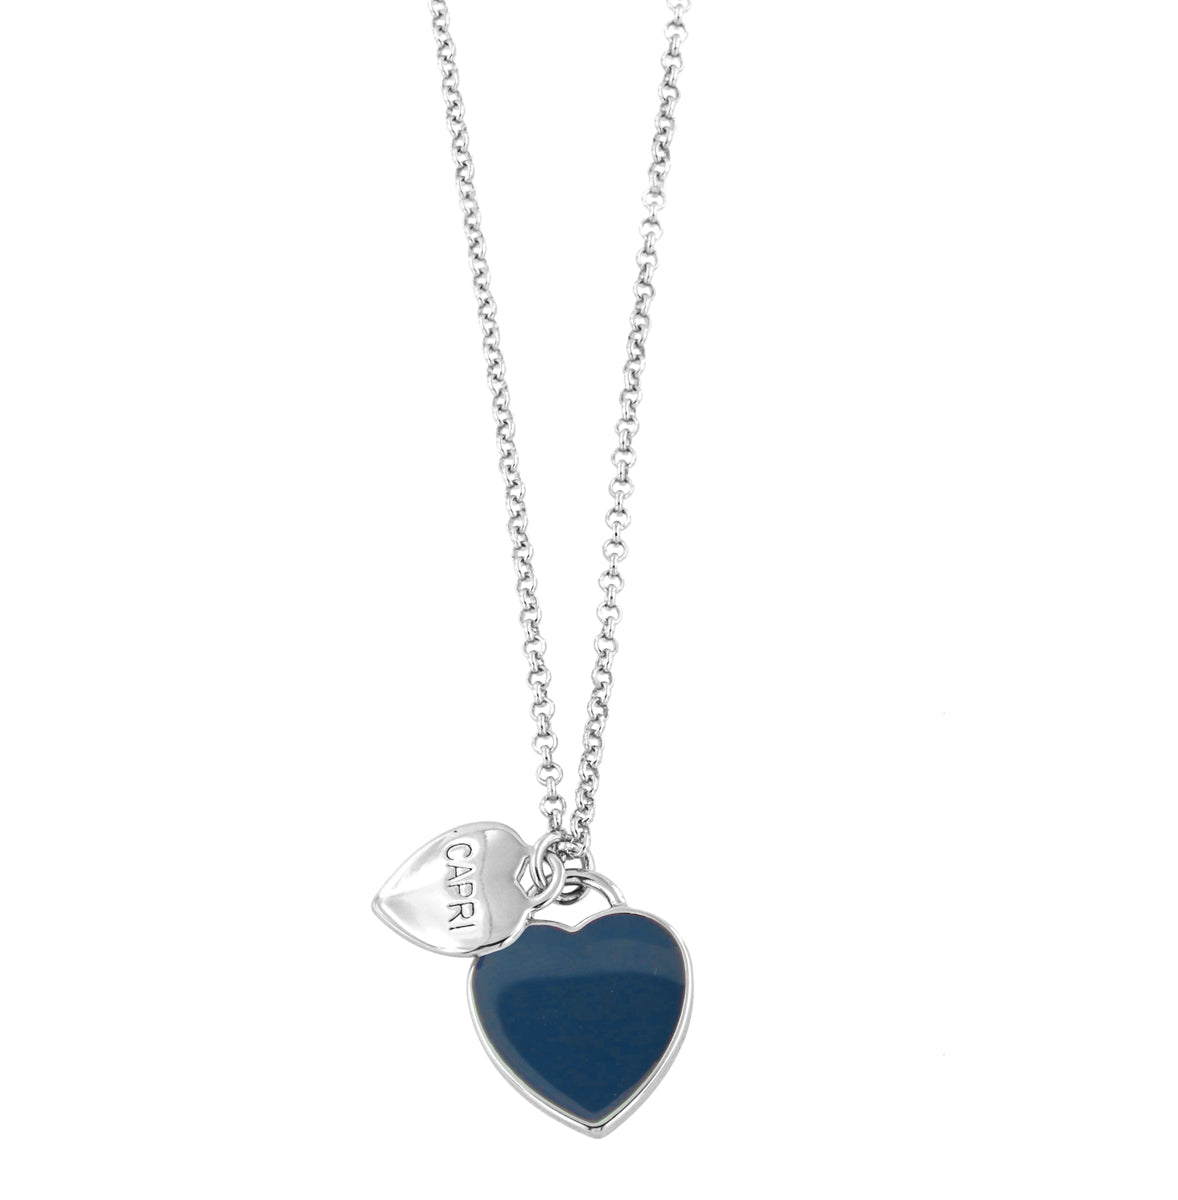 Metal necklace with heart pending blue enamel